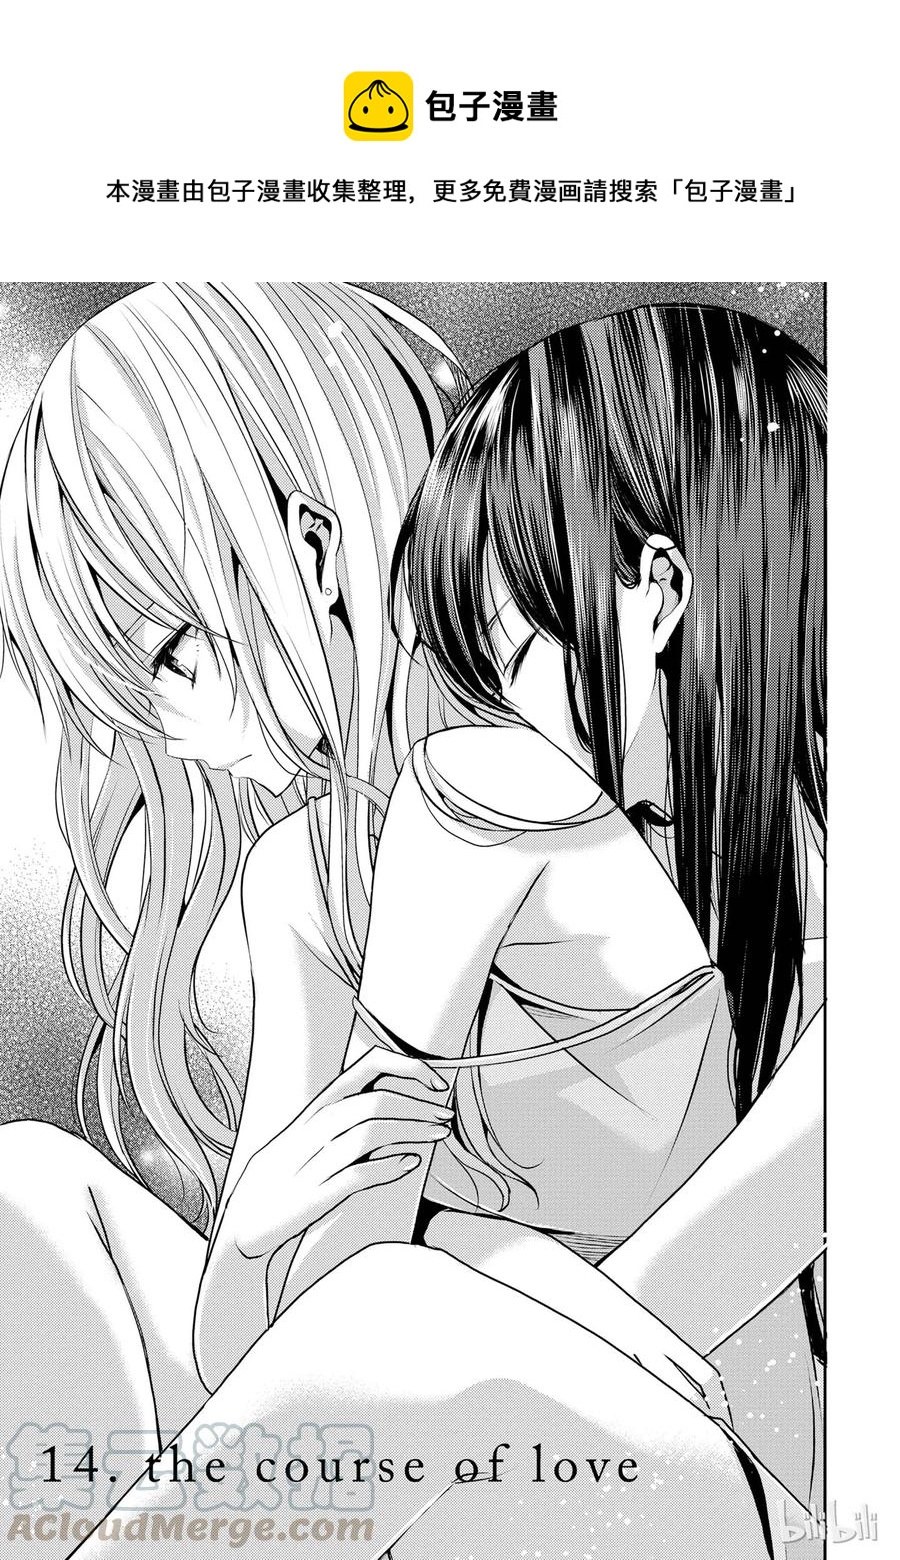 citrus 柑橘味香氣 - 14 the course of love - 1